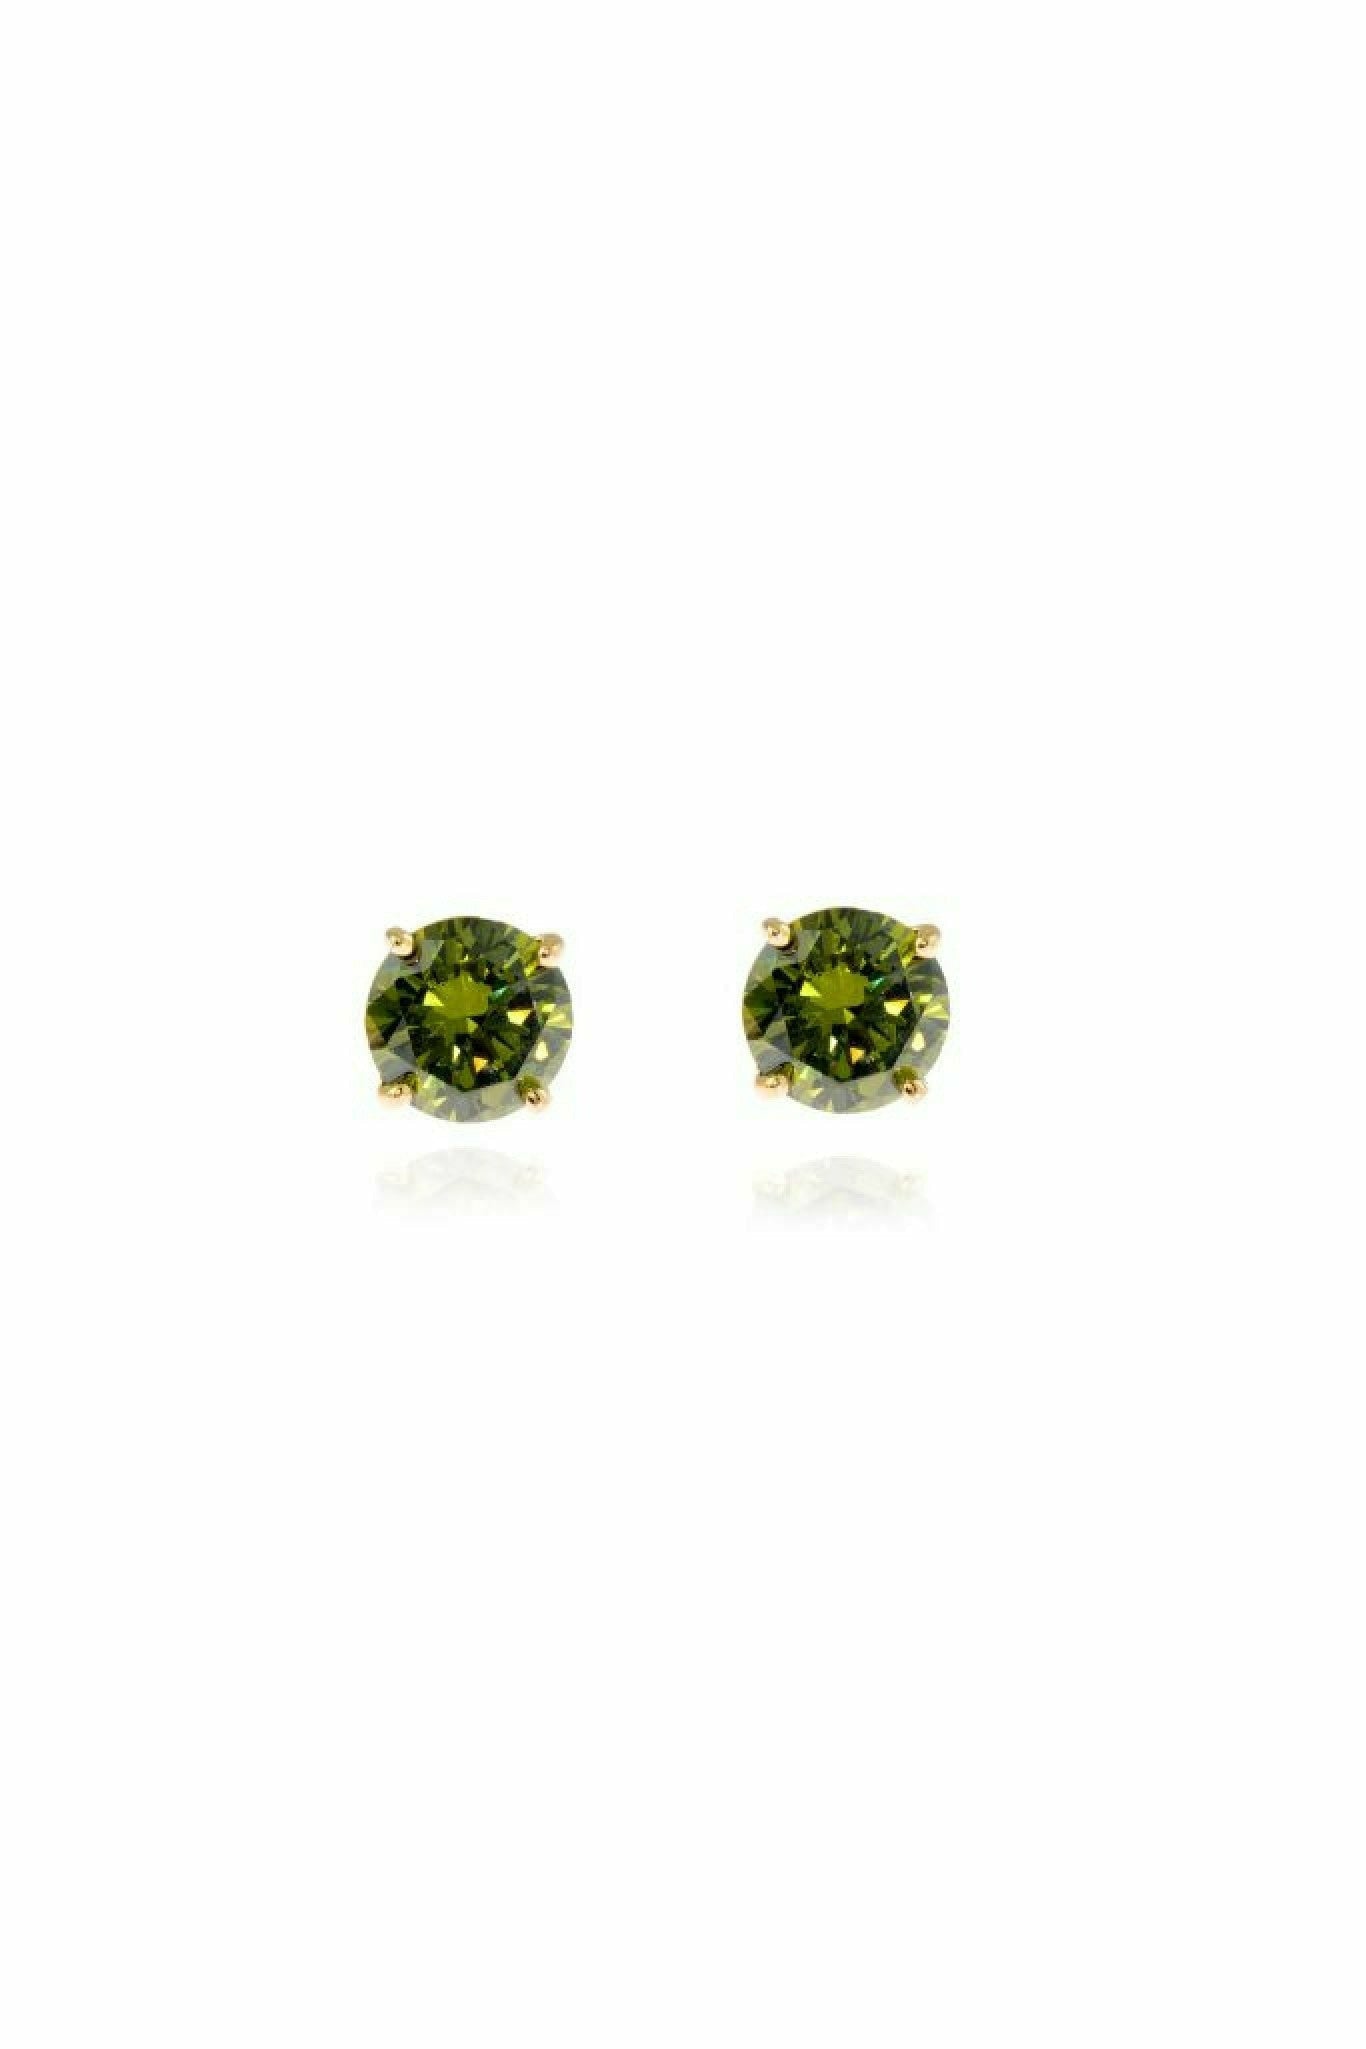 Lana 6mm-Sterling Silver, 18ct Gold Plated earrings with Olivine CZ Cachet London